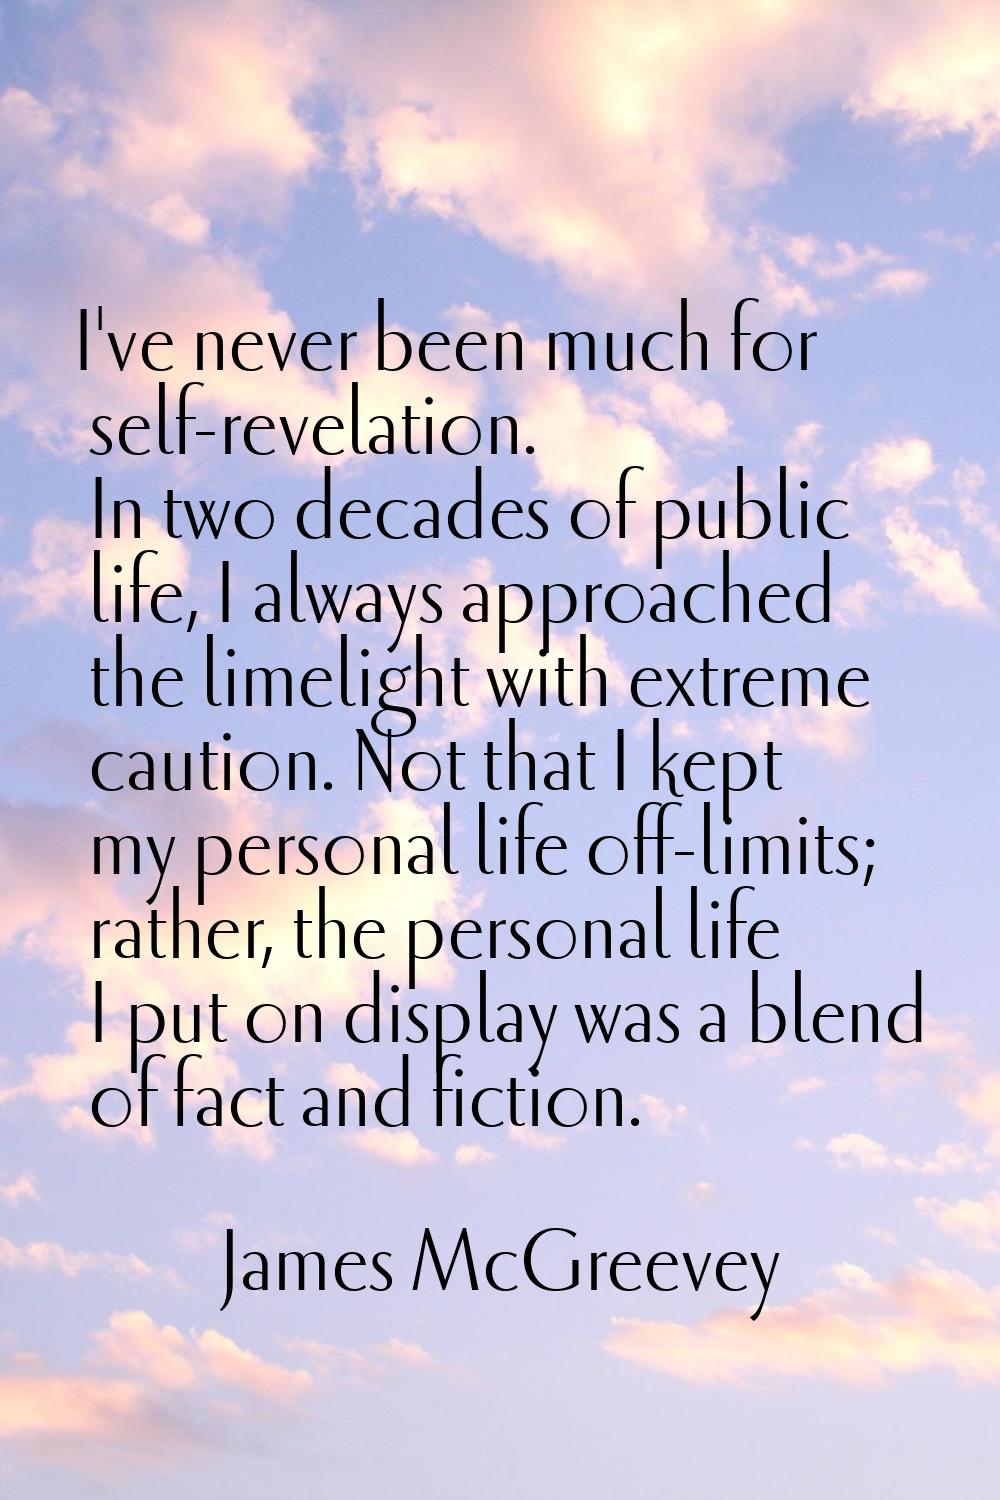 I've never been much for self-revelation. In two decades of public life, I always approached the li